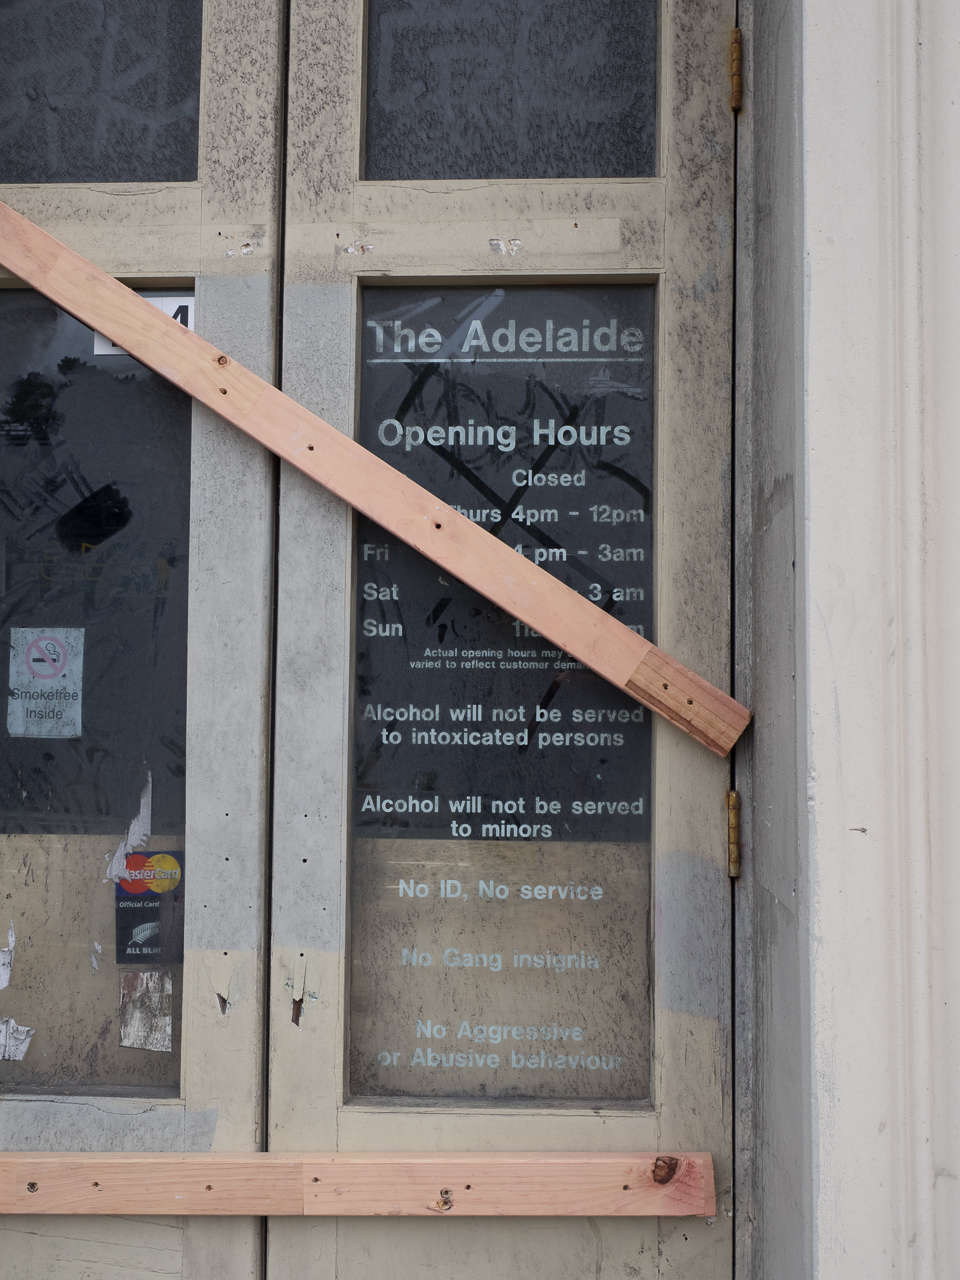 The boarded up Adelaide Road pub.